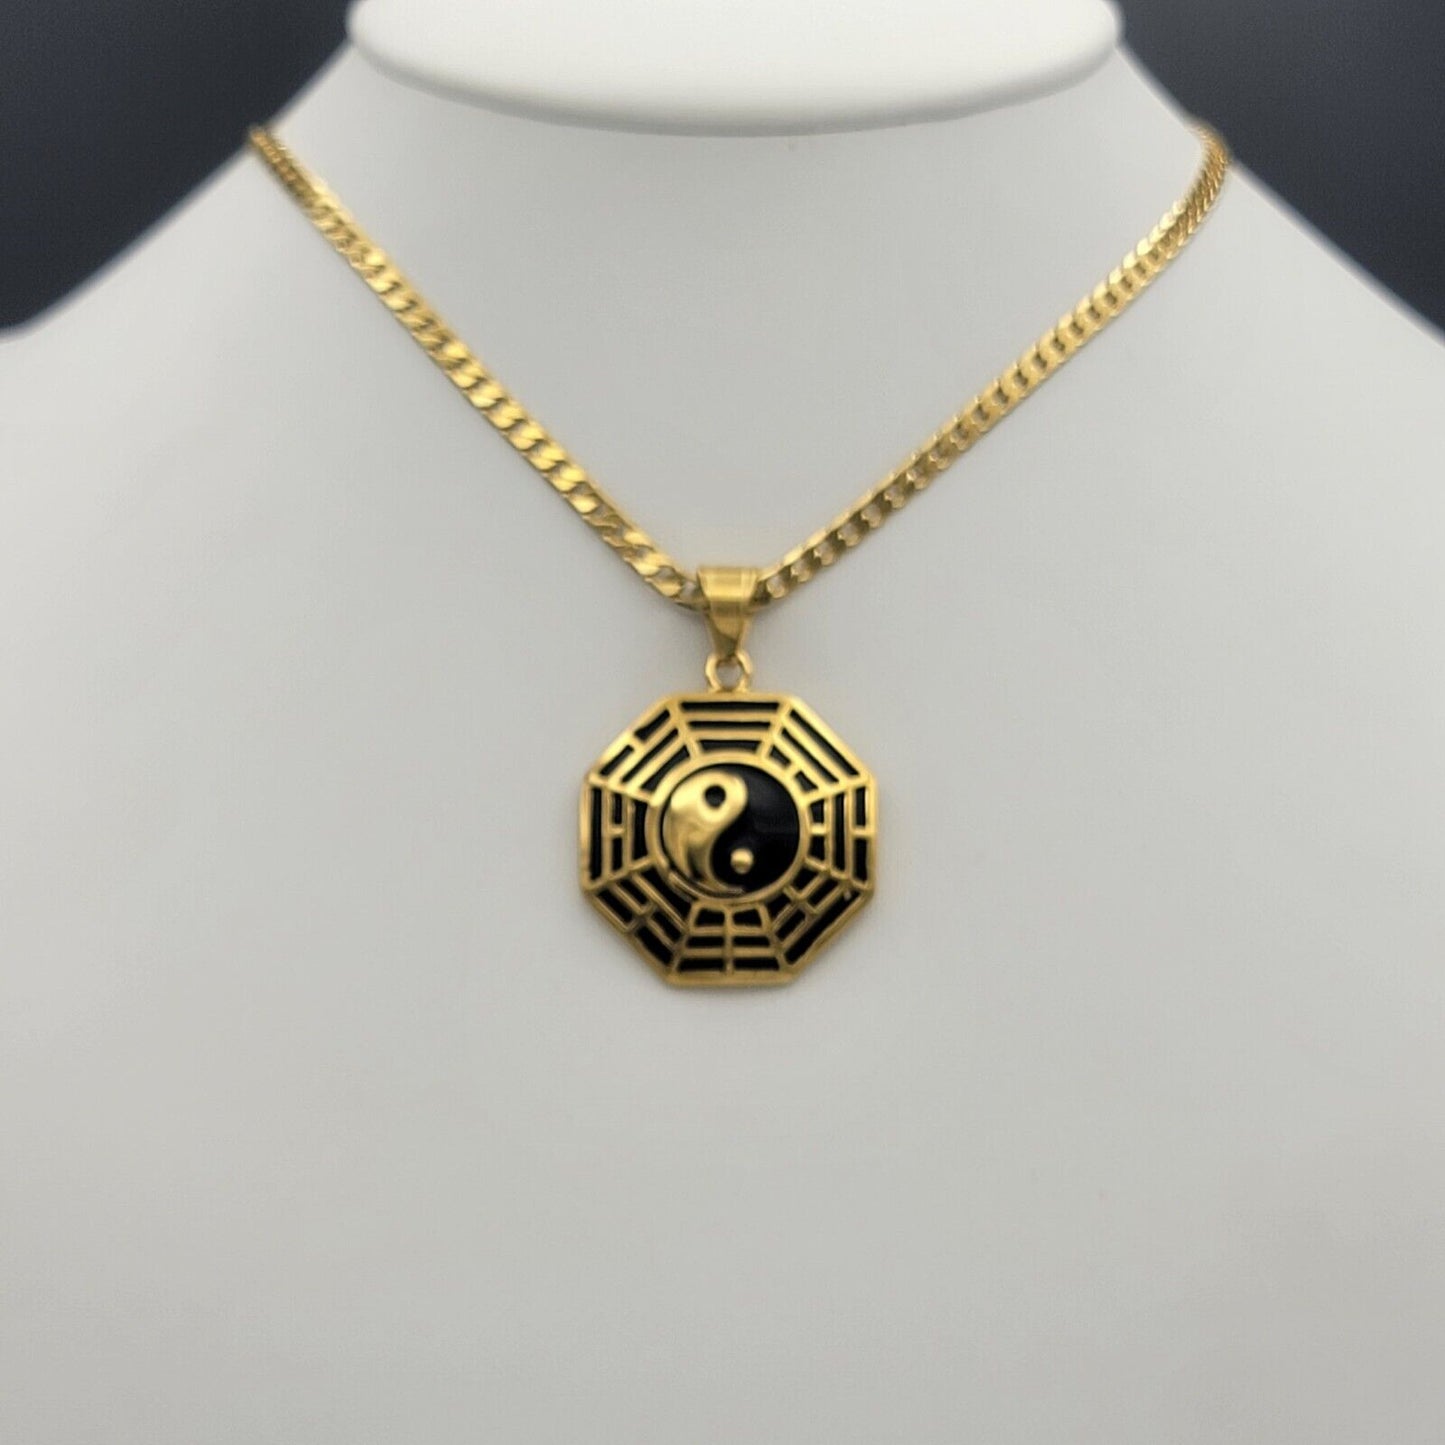 Necklaces - 24K Gold Plated. Two Tones Yin & Yang Taiji Bagua Pendant & Chain.